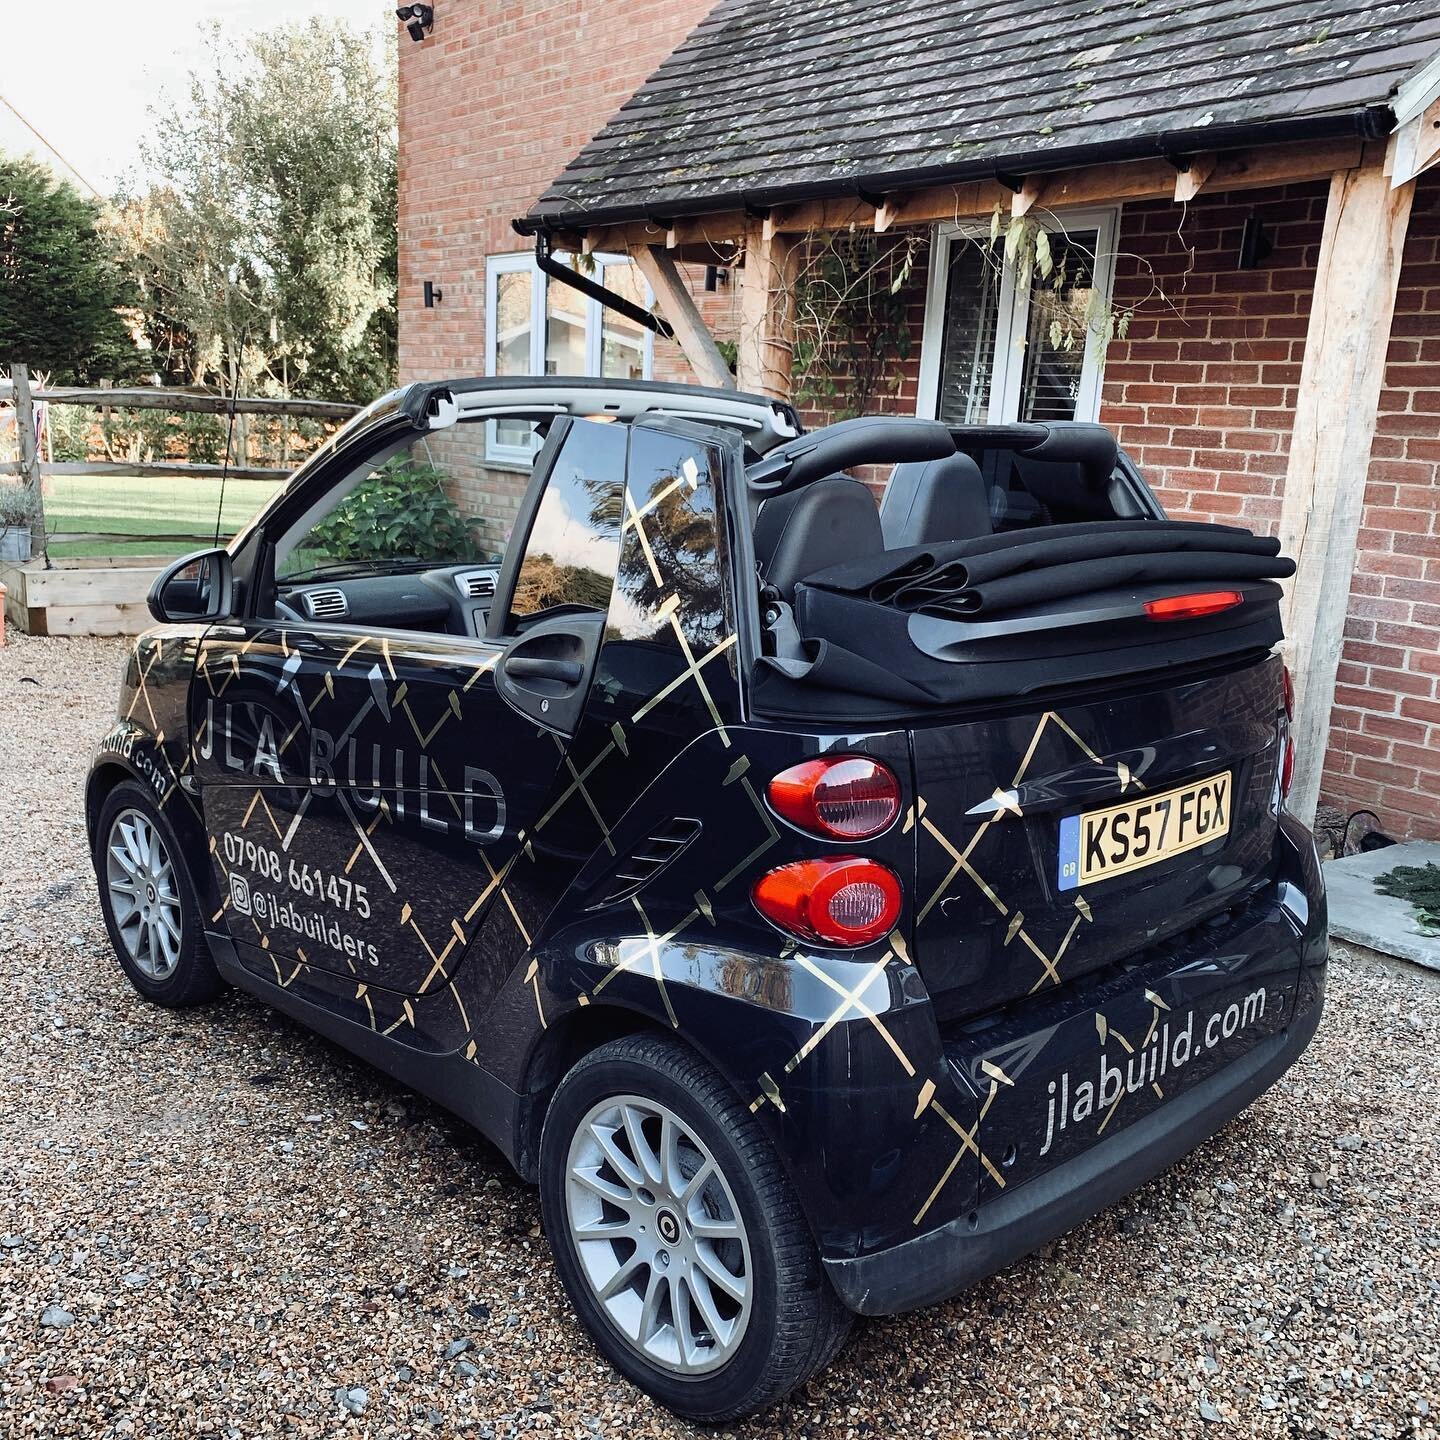 So much fun taking this little bug out this weekend. Advertisement on wheels. Great  little motor! 

#builder #berkshirebuilder #maidenheadbuilder #carpentry #construction #berkshireconstruction #jlabuild #homerenovation #joinery